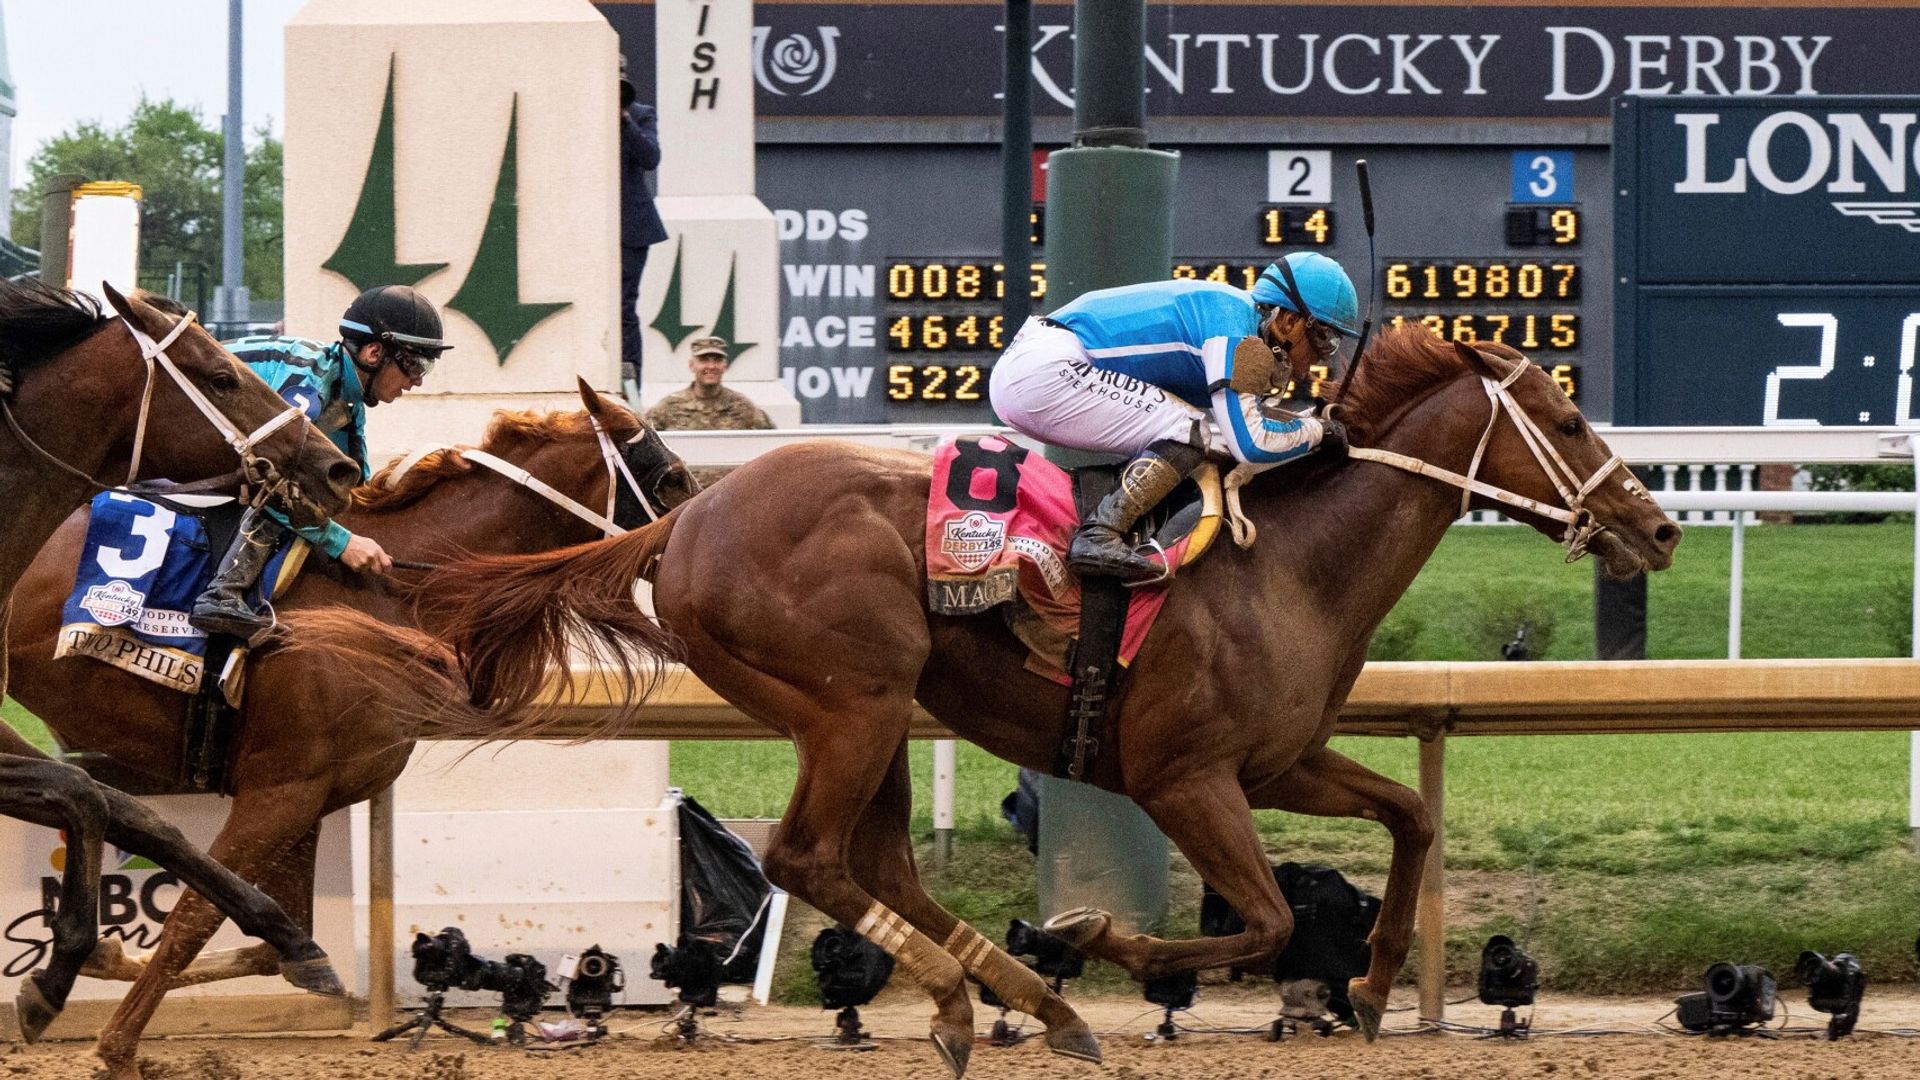 Mage wins Kentucky Derby however horse deaths overshadow world's most